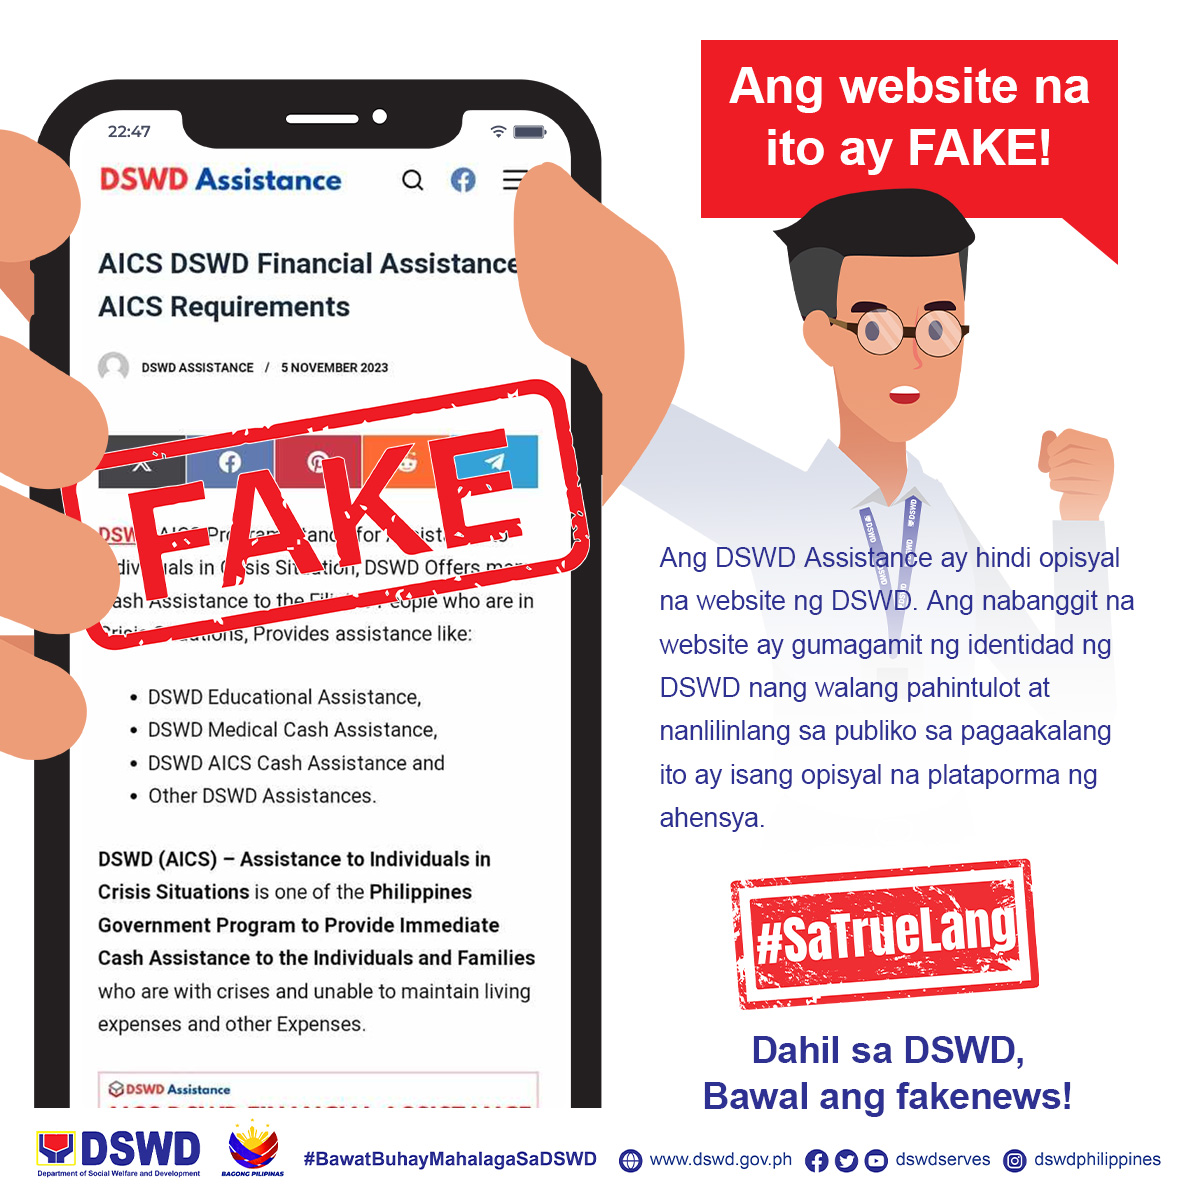 DSWD) announced on Tuesday that a certain website that listed the requirements for its Assistance to individuals in crisis situations (AICS) program is fake.